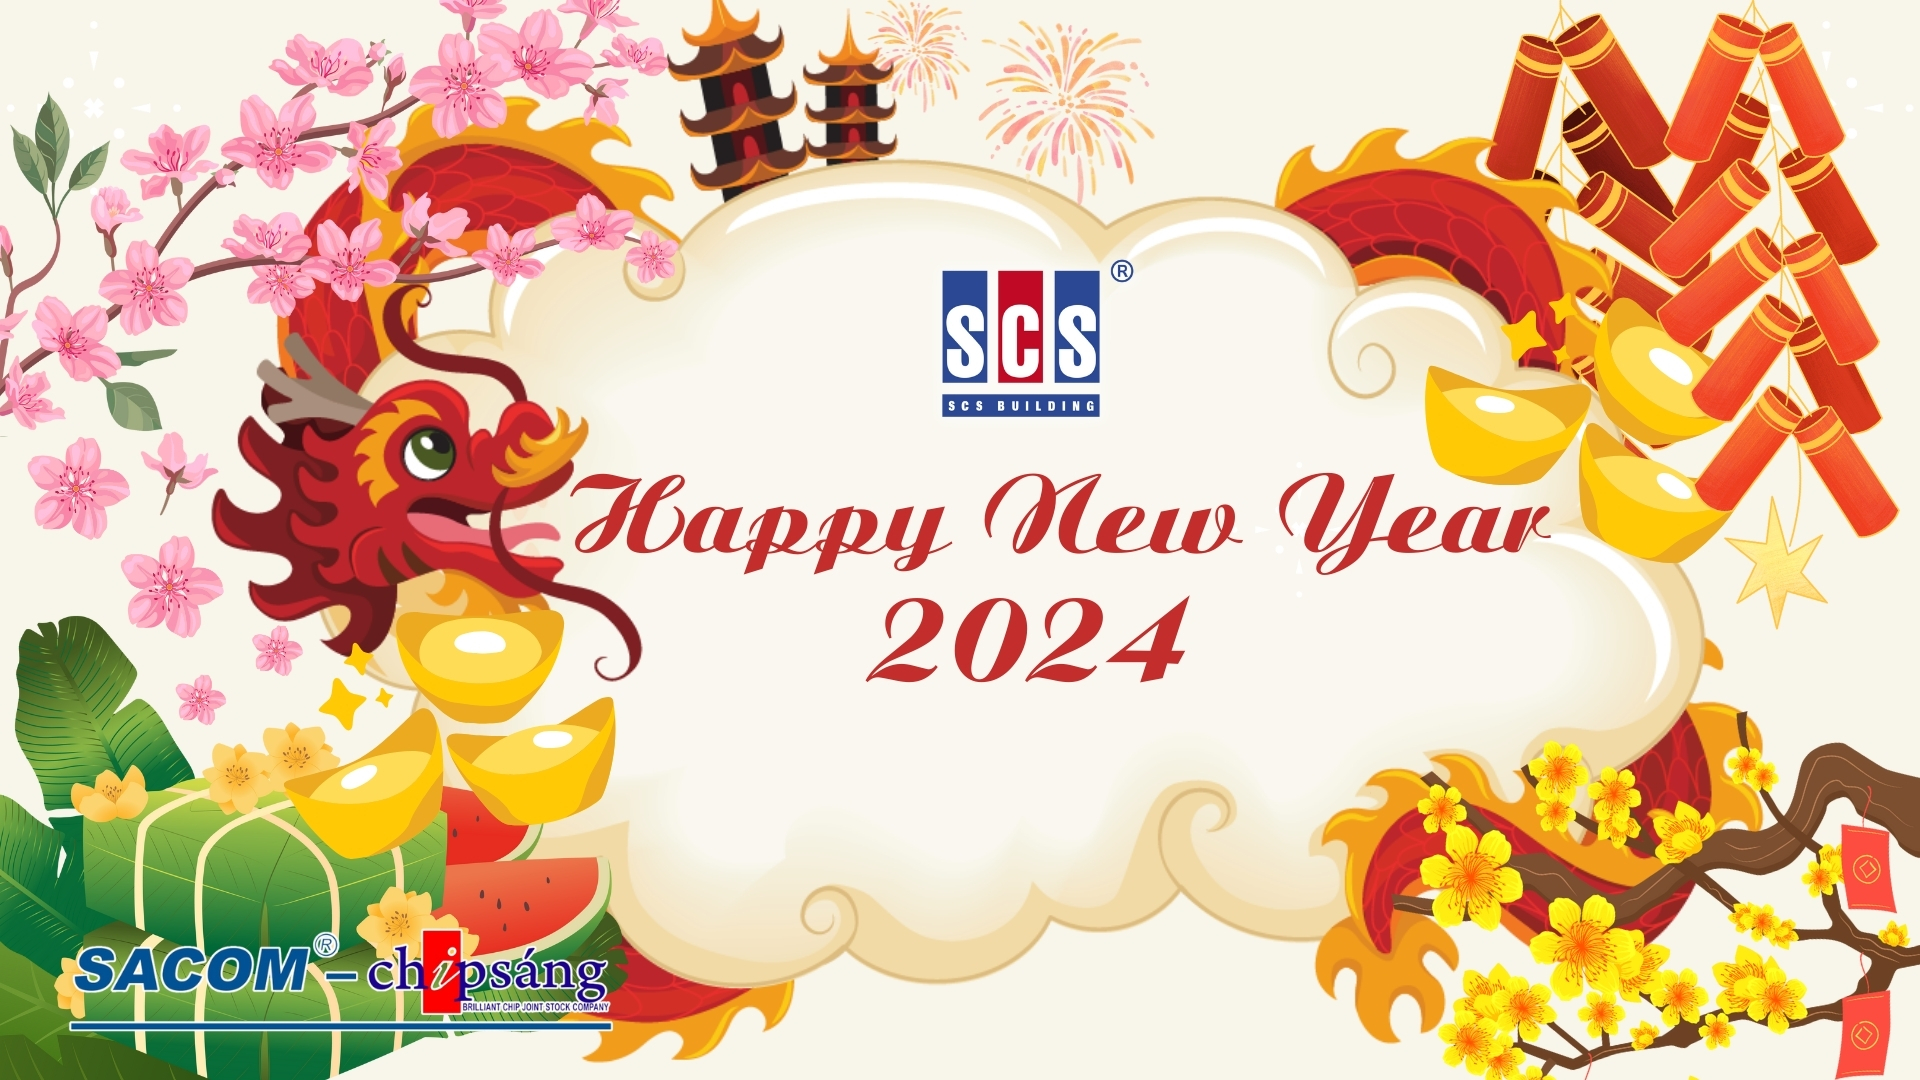 SACOM - CHIP SANG COMPANY LIMITED (SCS) HAPPY NEW YEAR OF THE DRAGON 2024